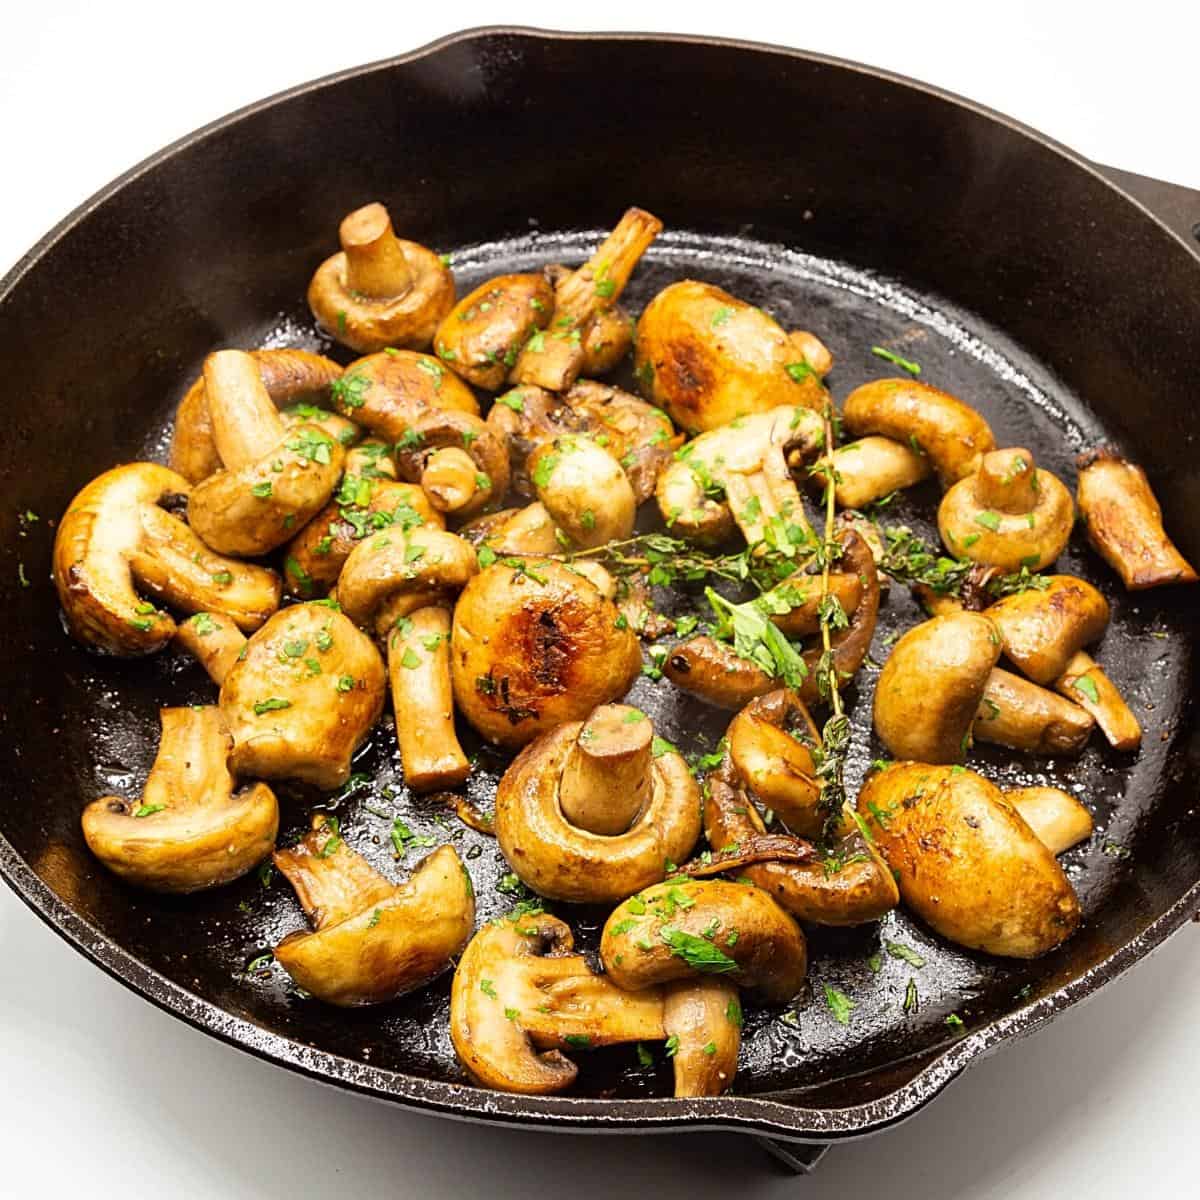 A skillet with mushrooms sauteed with garlic.